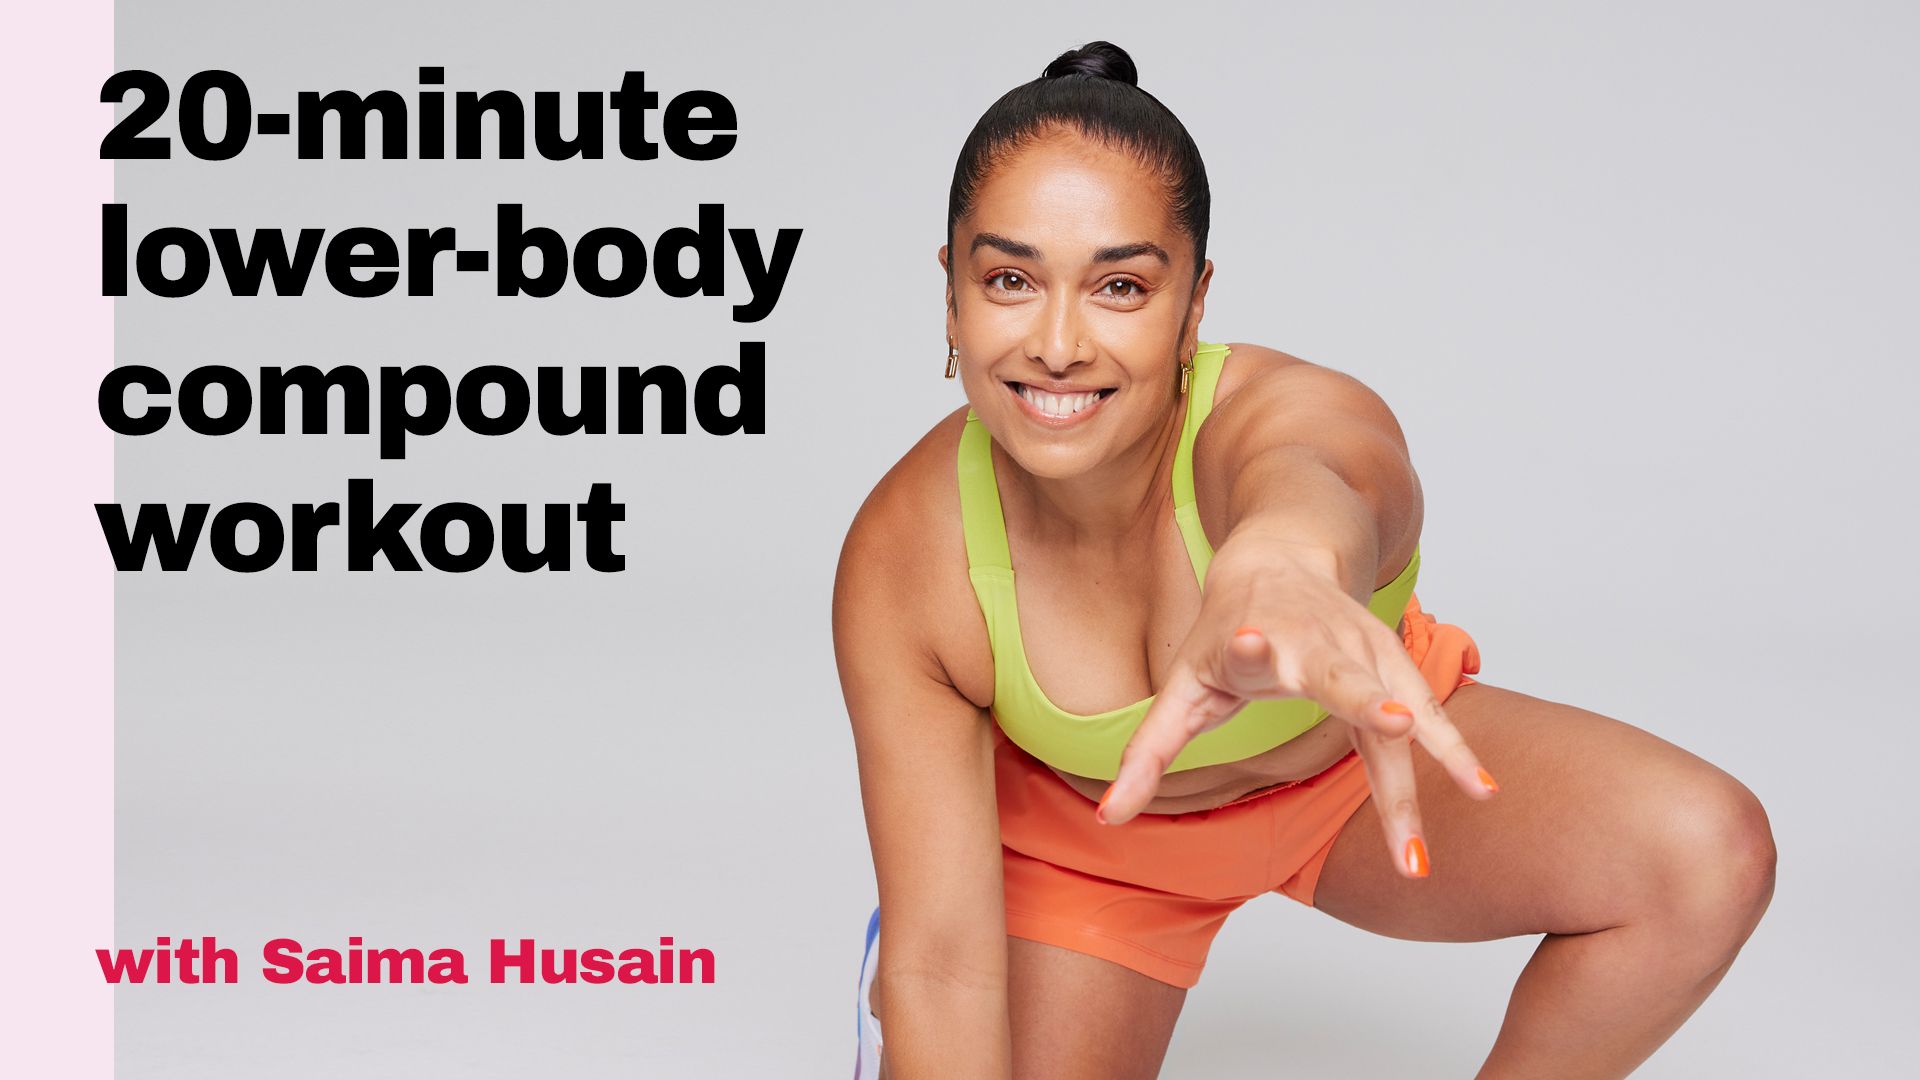 15-minute upper-body burn with India Morse